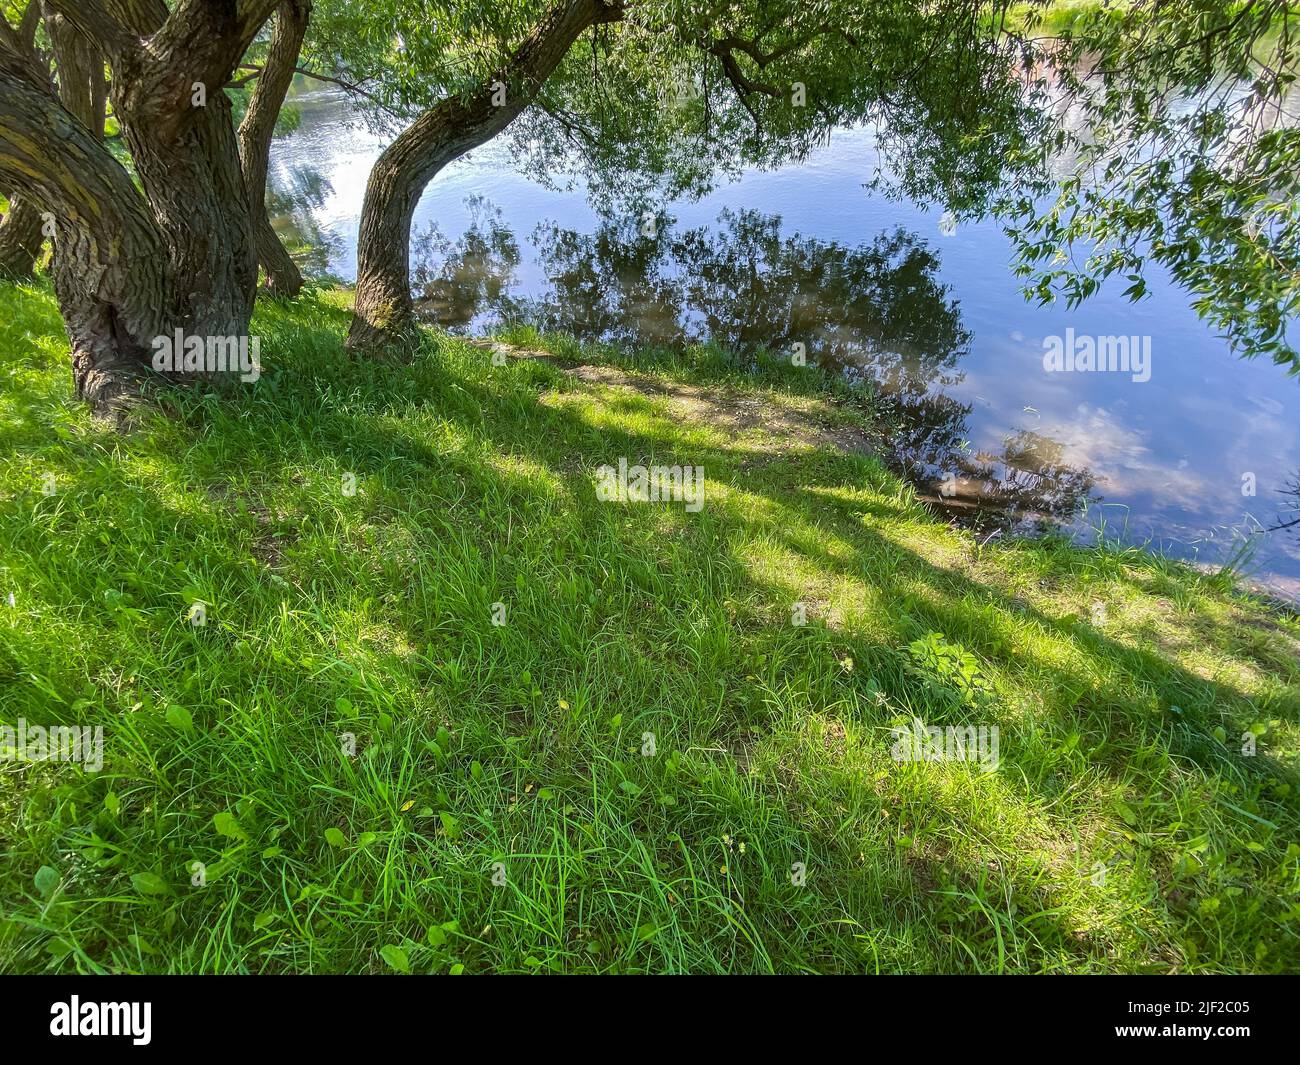 picturesque summer landscape with tree on riverbank and reflections of the blue sky in water Stock Photo